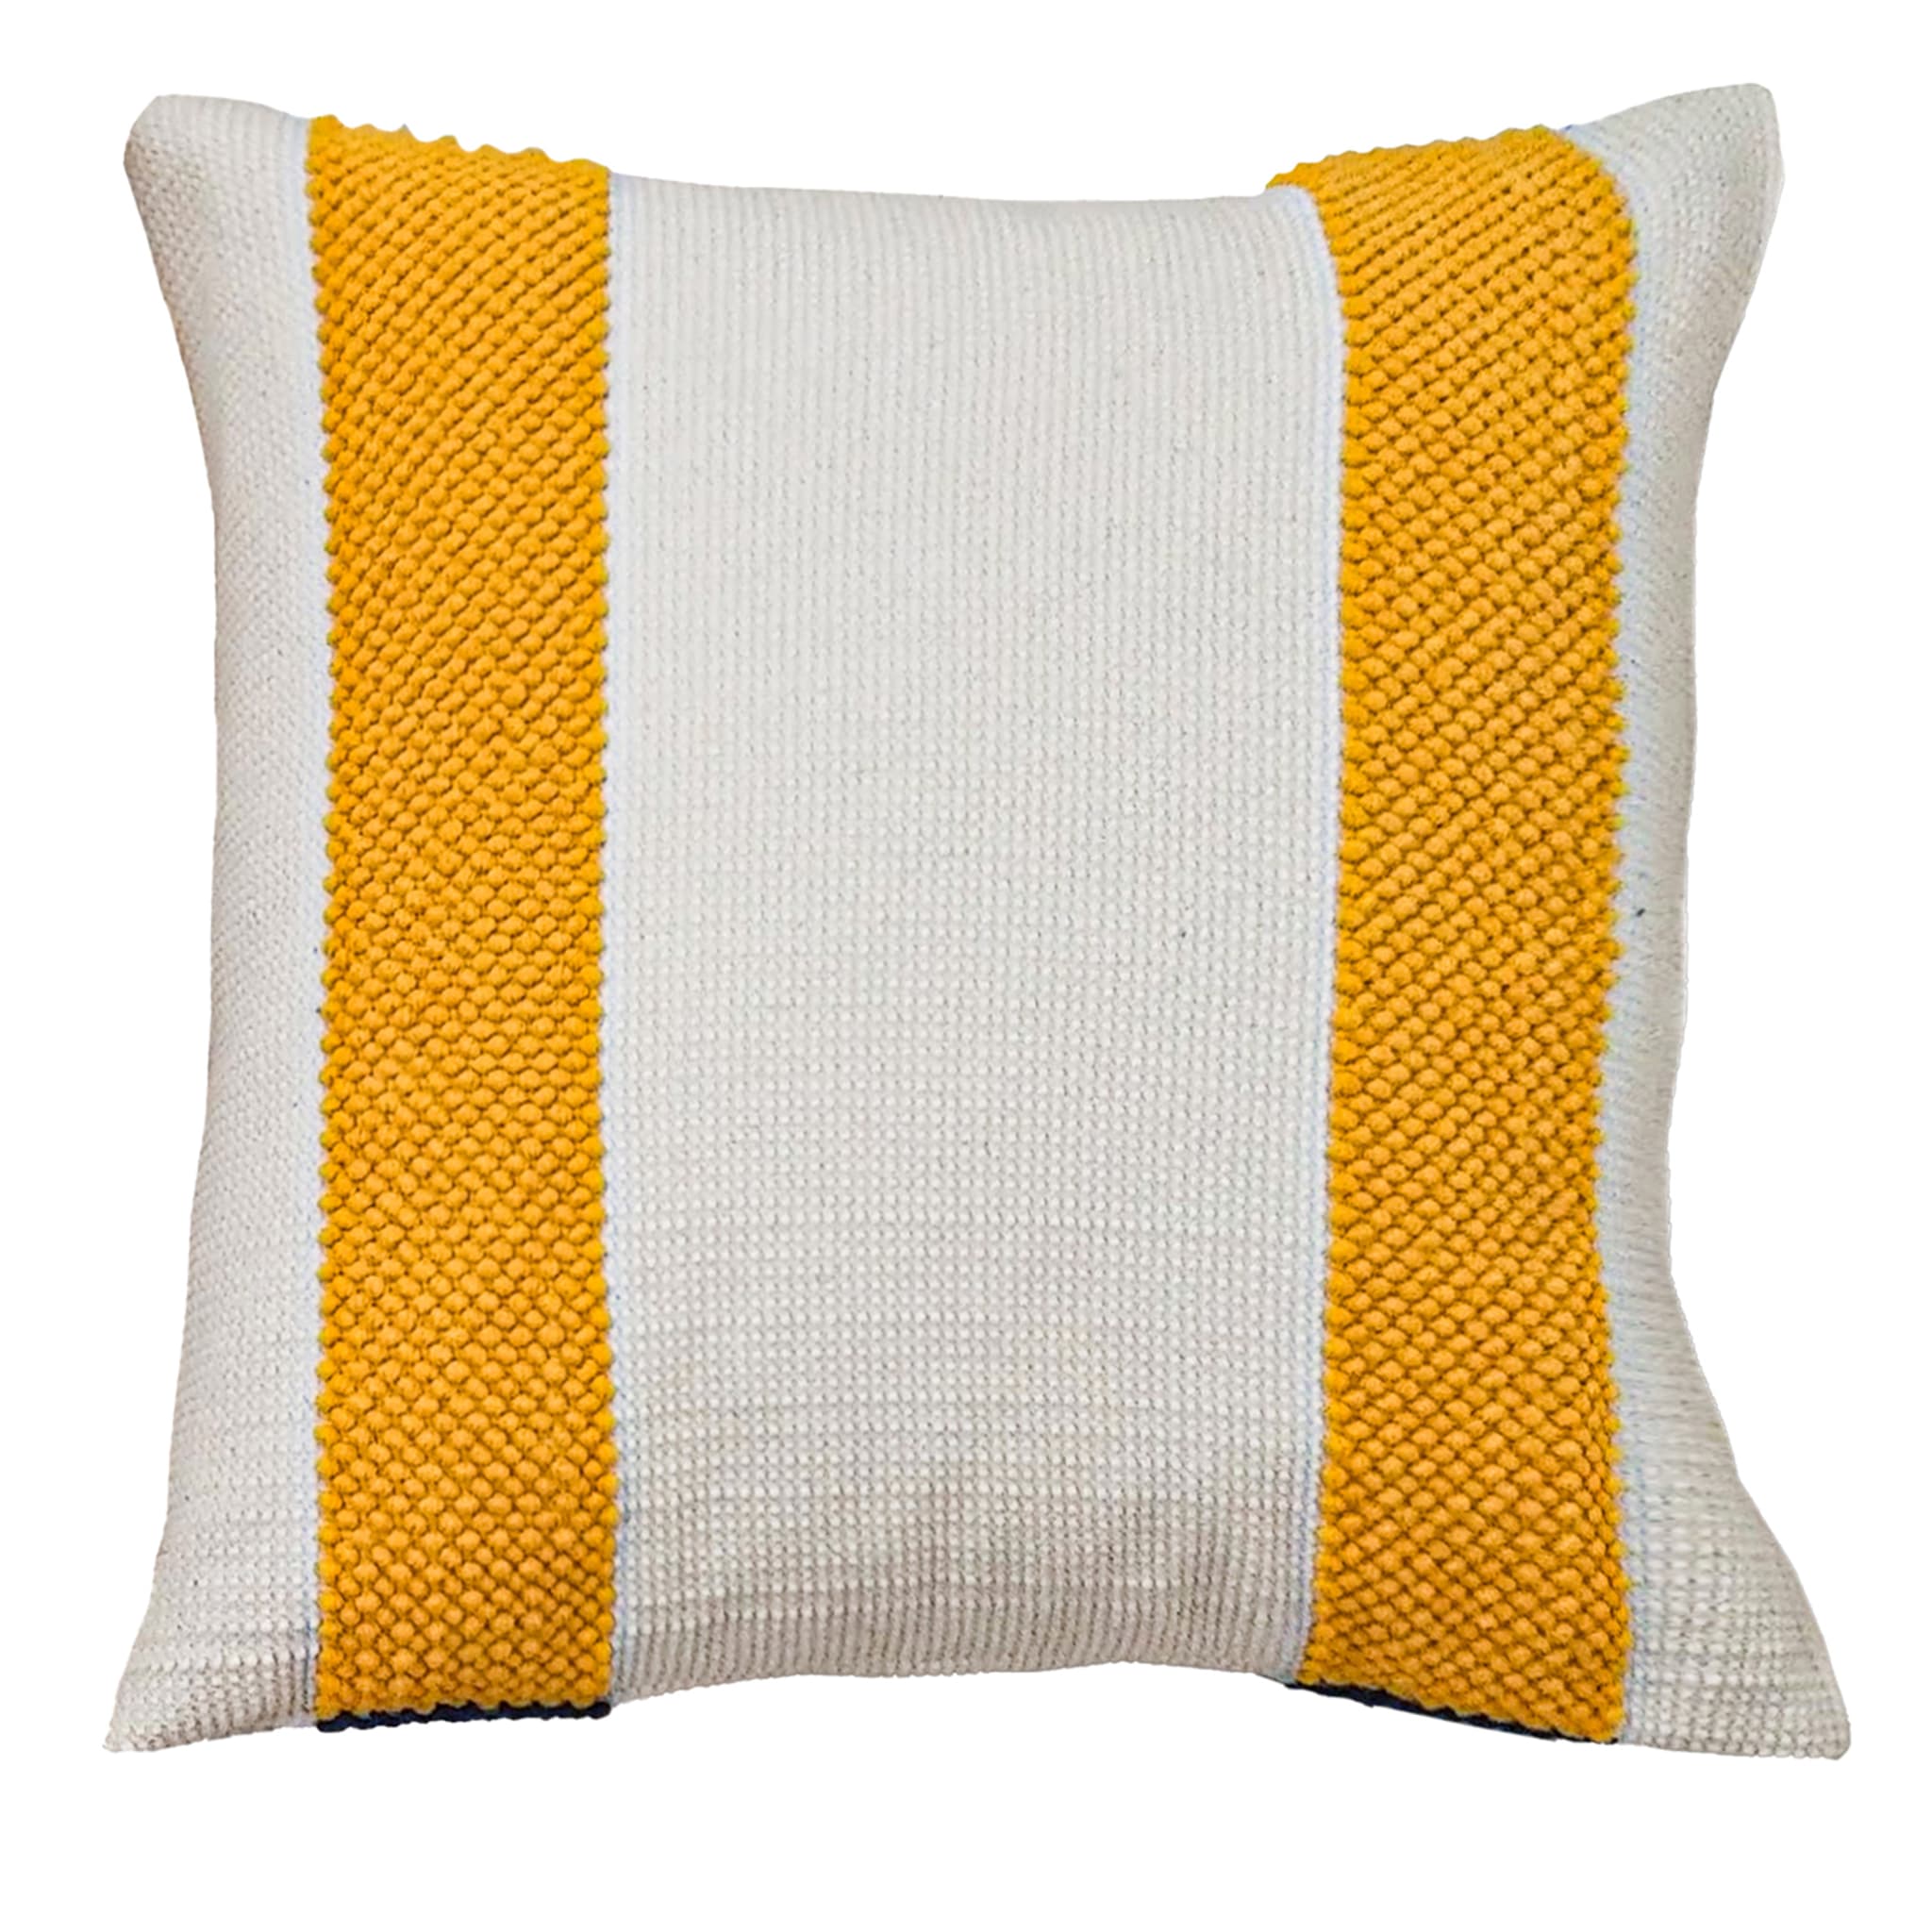 Ecru, Yellow, and Blue Double-Sided Cushion - Main view